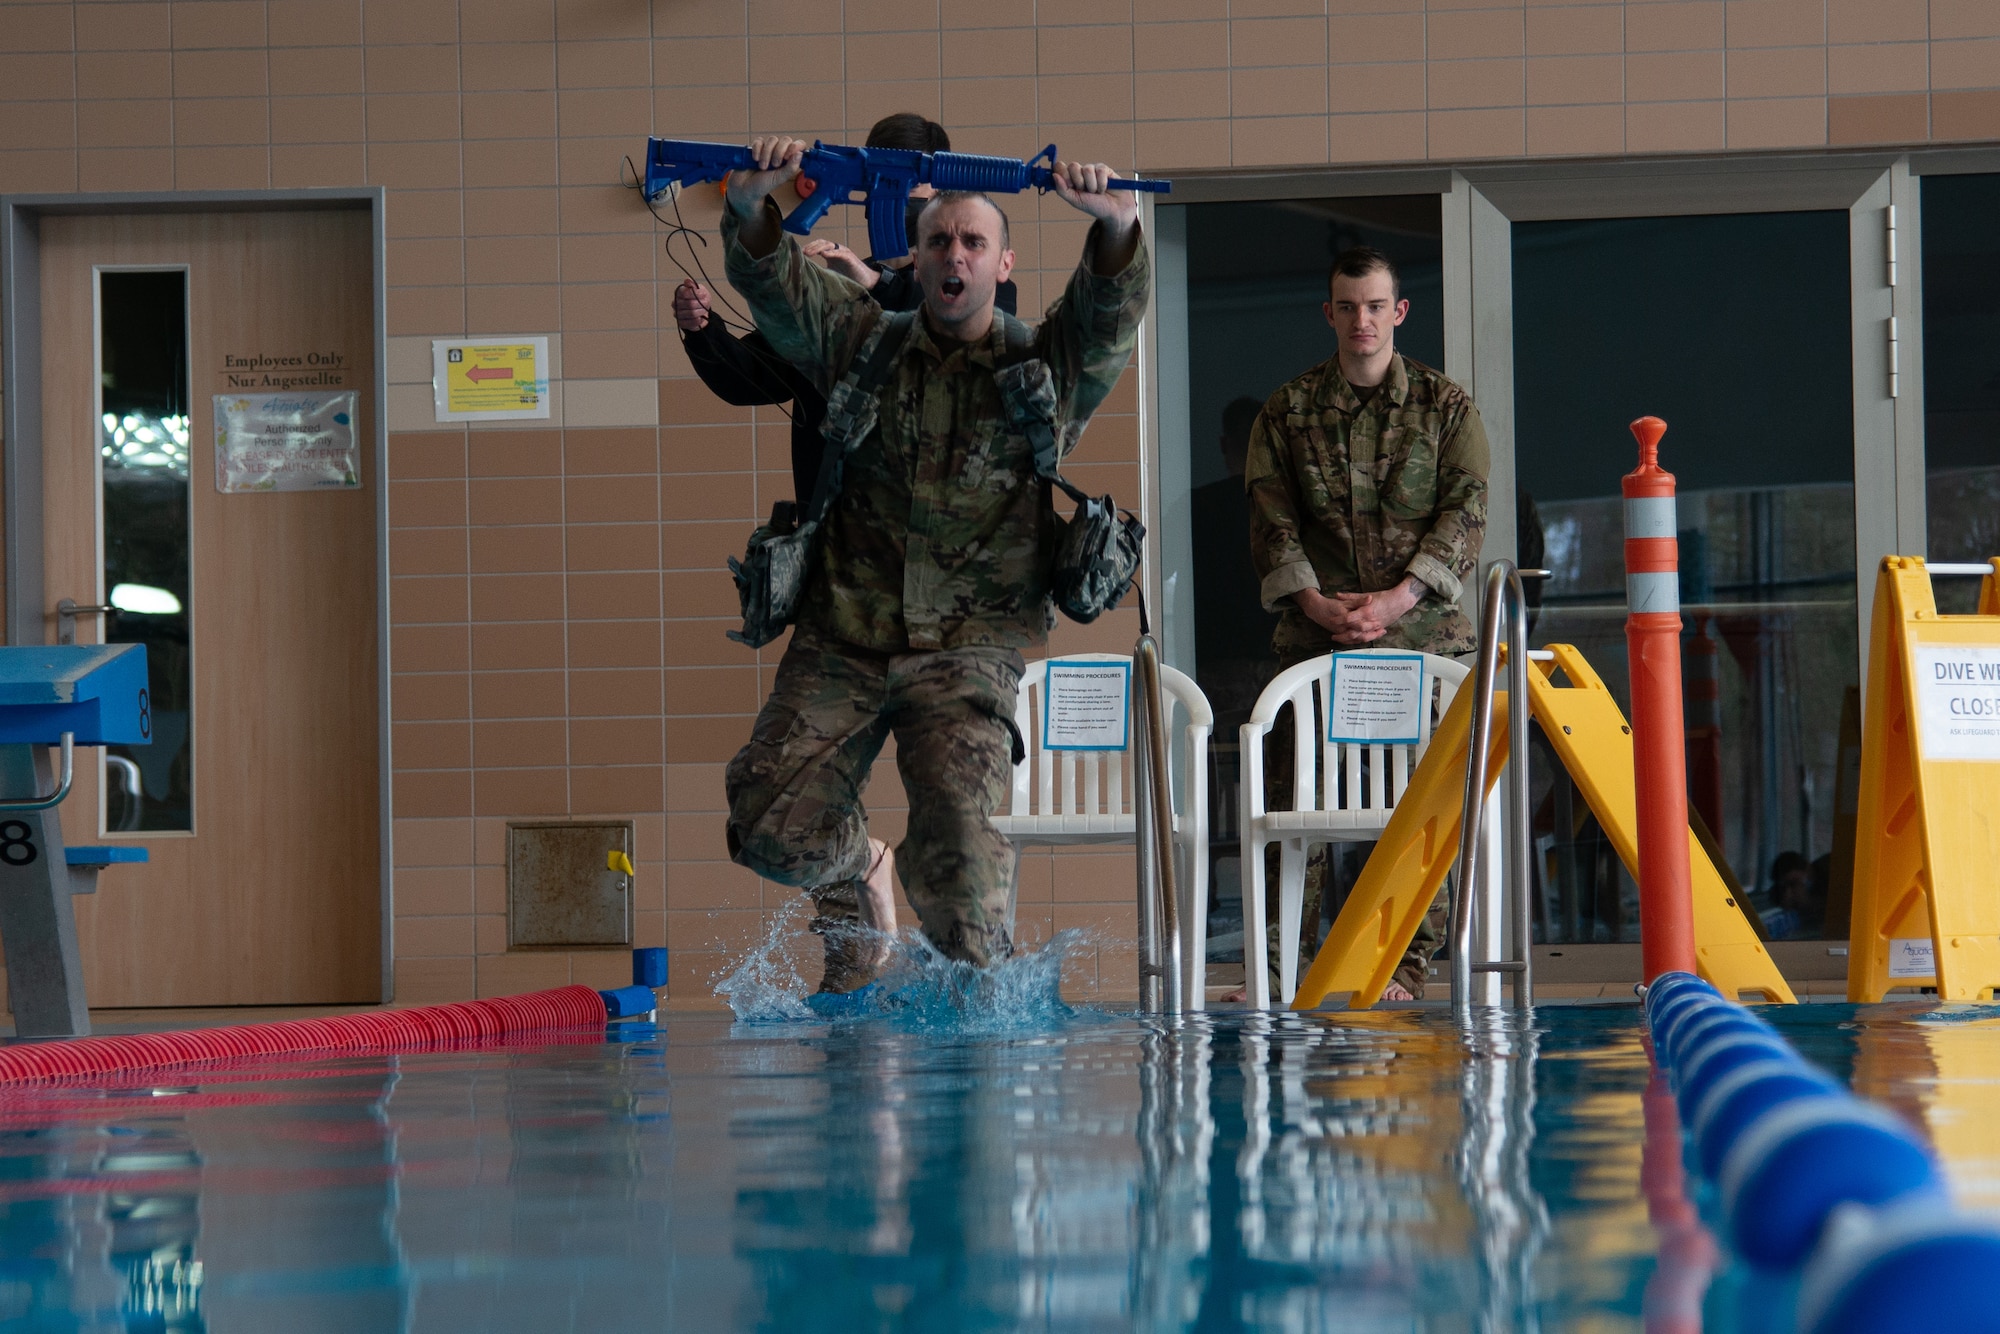 Man in uniform holding training weapon jumps in pool